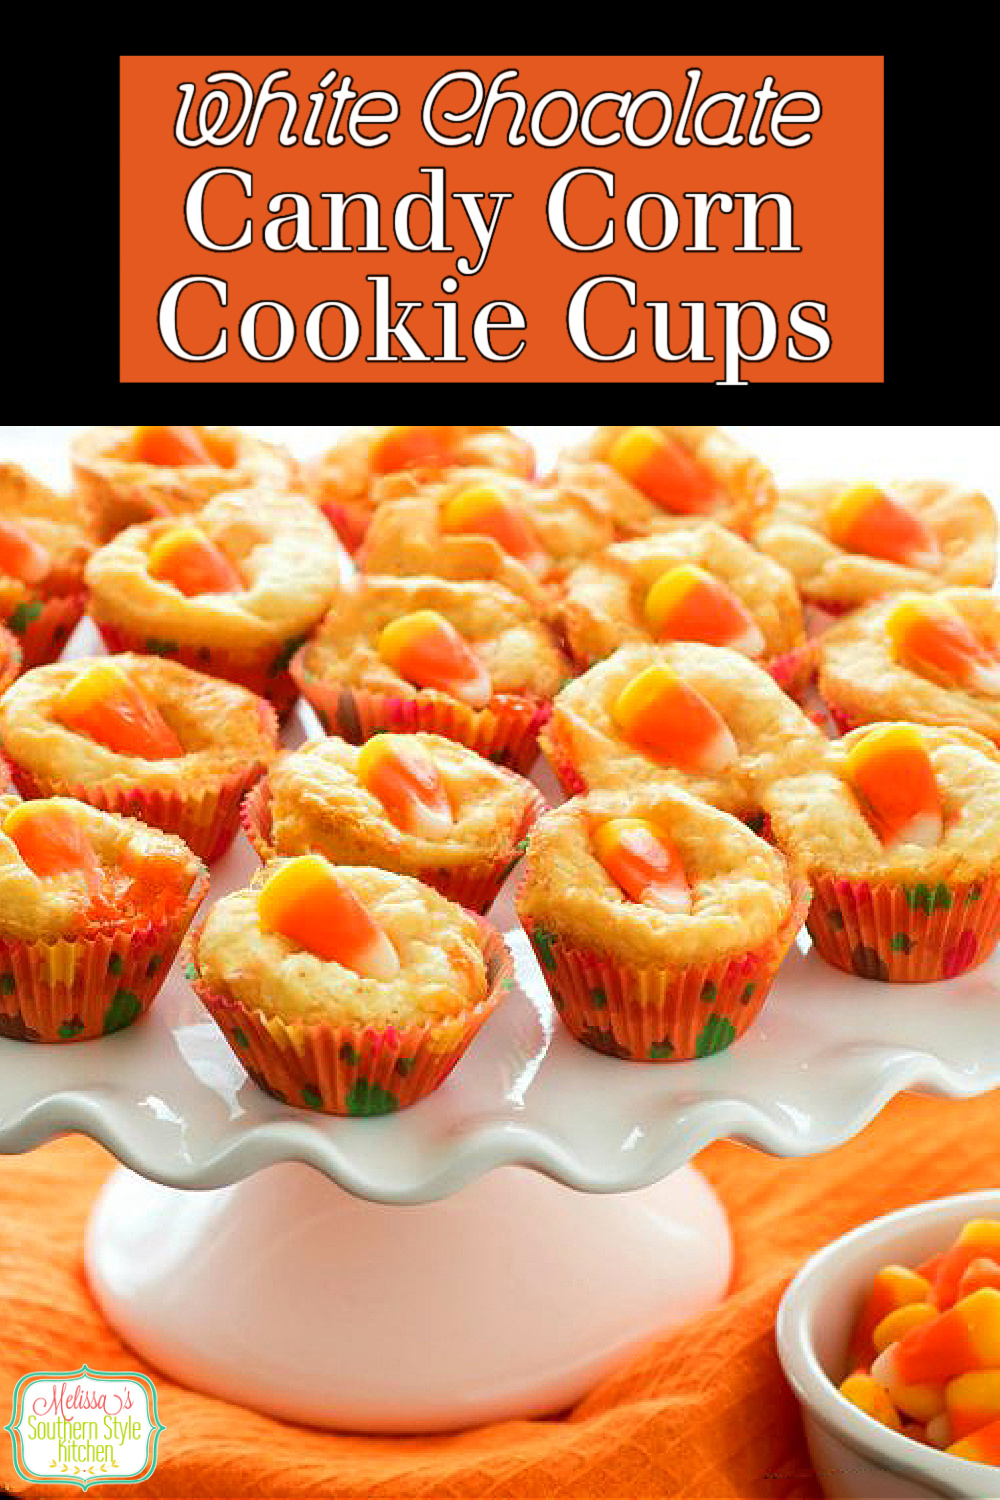 These seasonal two-bite cookie cups are a fun way to celebrate the flavors synonymous with fall #cookiecups #candycorncookies #candycorncookiecups #whitechocolatecookiecups #fallbaking #halloweeencookies #cookies #desserts #dessertfoodrecipes #southernfood #southernrecipes via @melissasssk